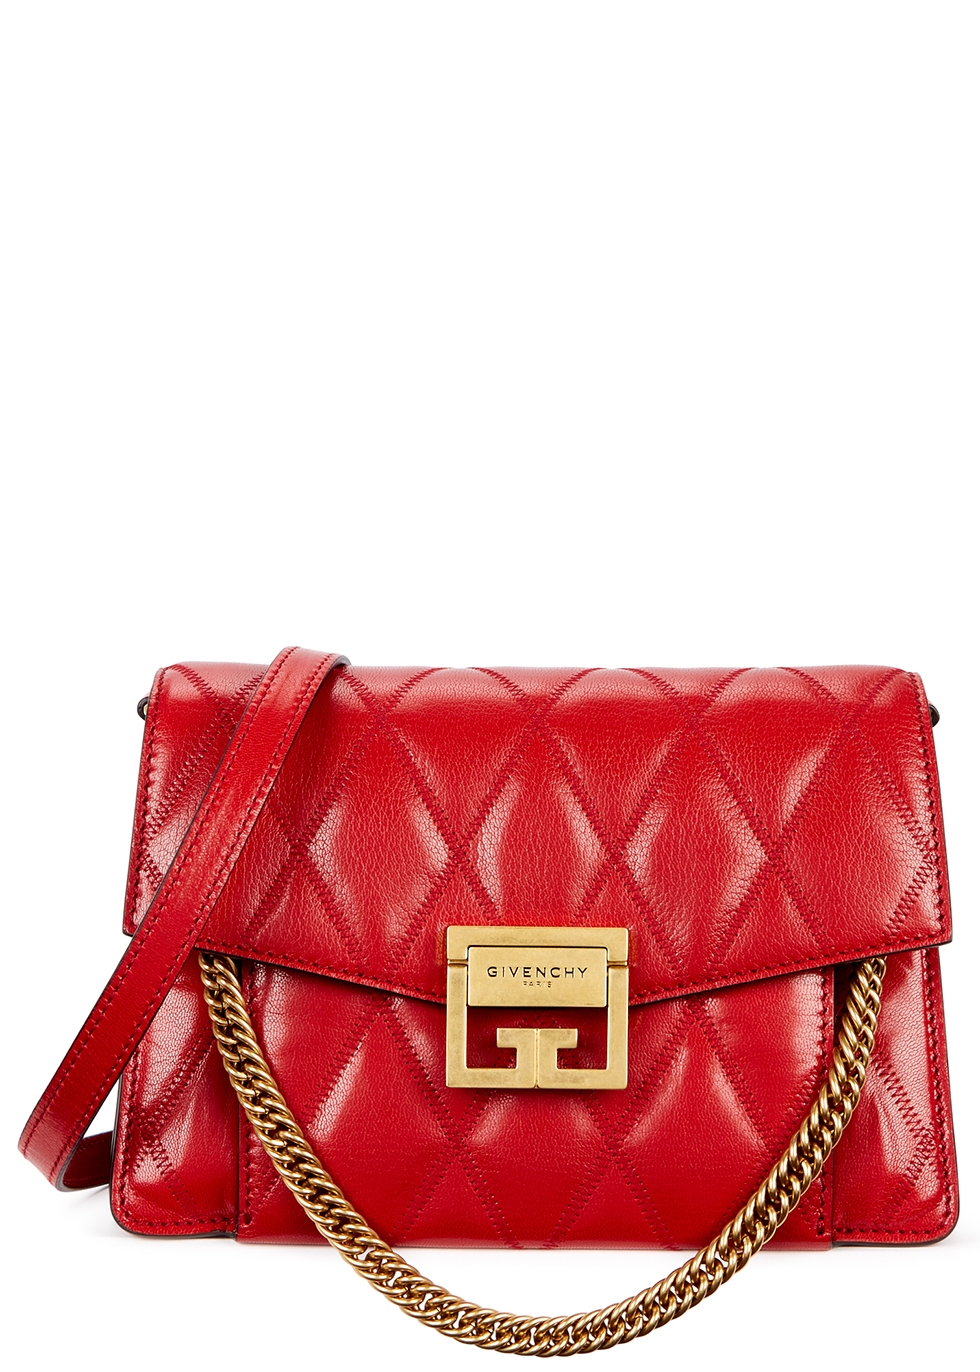 Givenchy GV3 small red quilted leather cross-body bag - Harvey Nichols